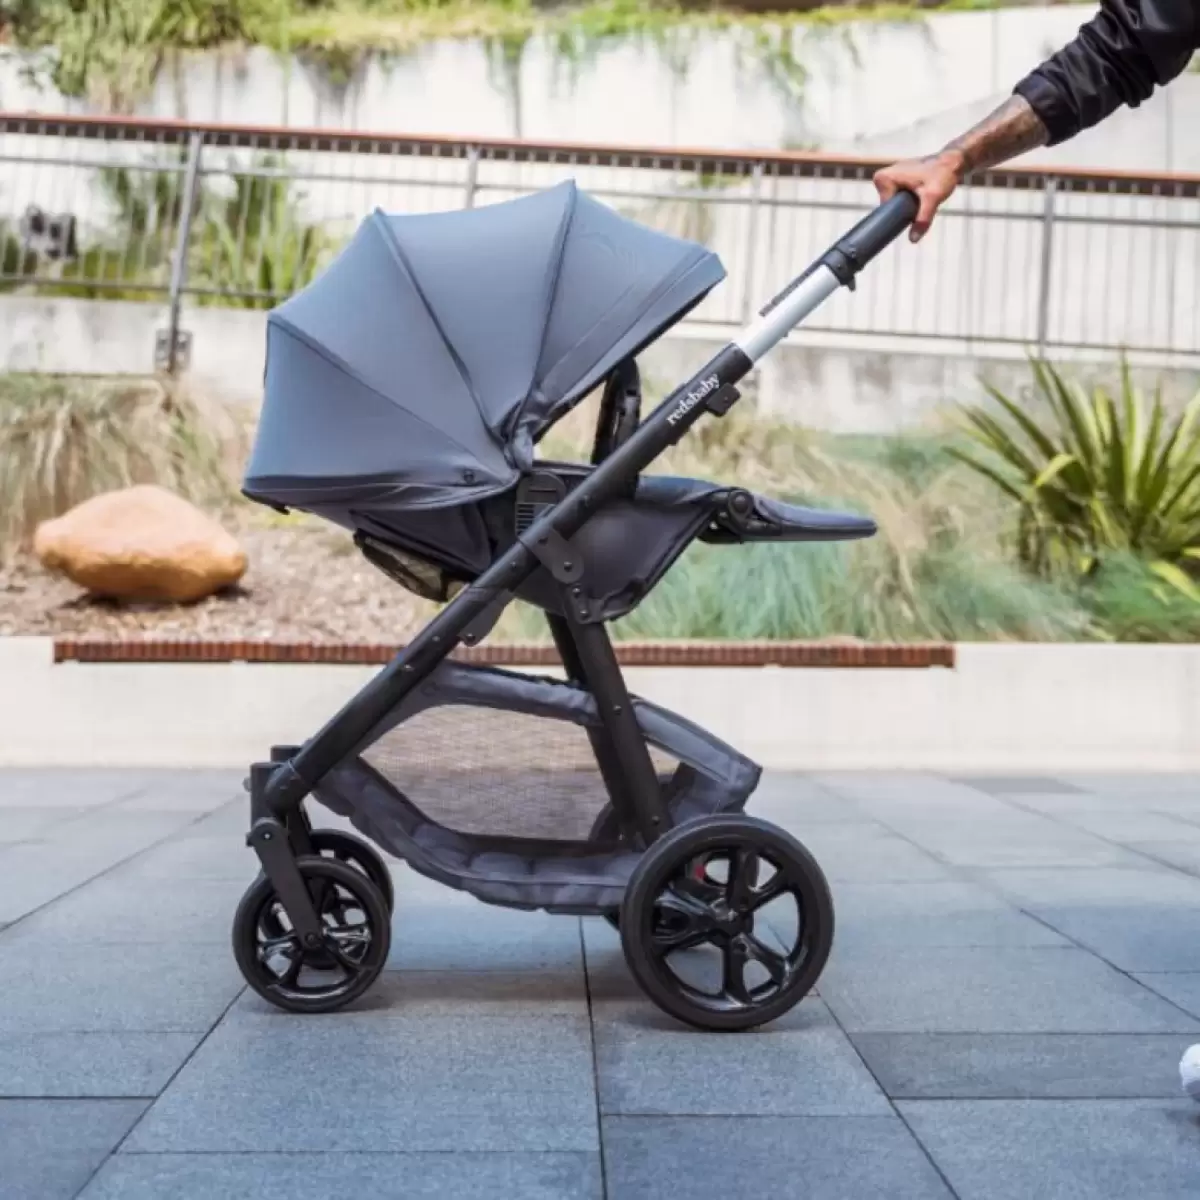 7 Reasons The Brand New Redsbaby Metro Lite Stroller Is The Pram For You 2